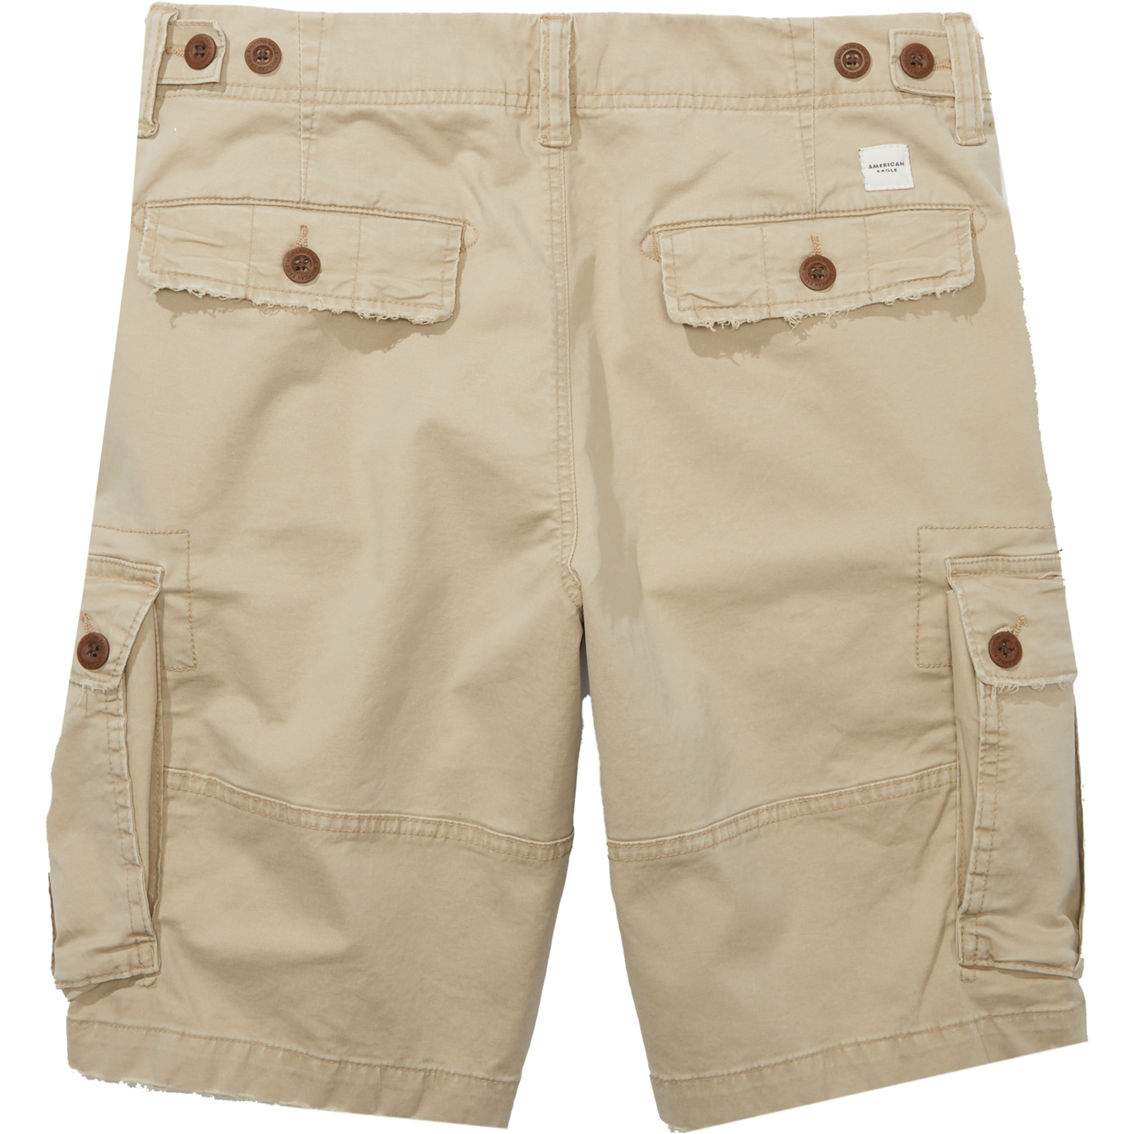 American Eagle Flex 10 in. Lived-In Cargo Shorts - Image 5 of 5